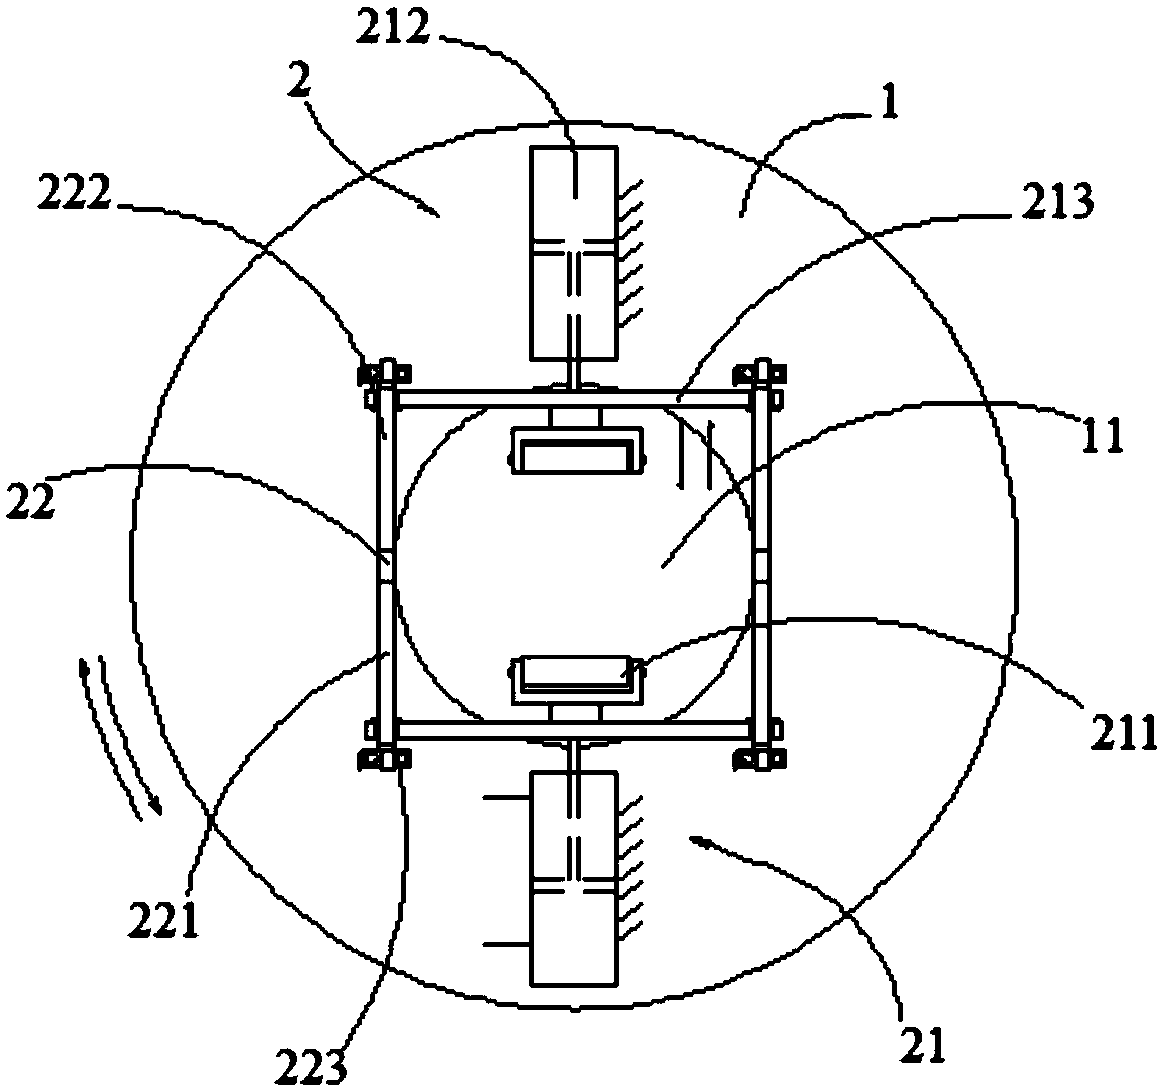 Four-claw automatic centering chuck and machine tool